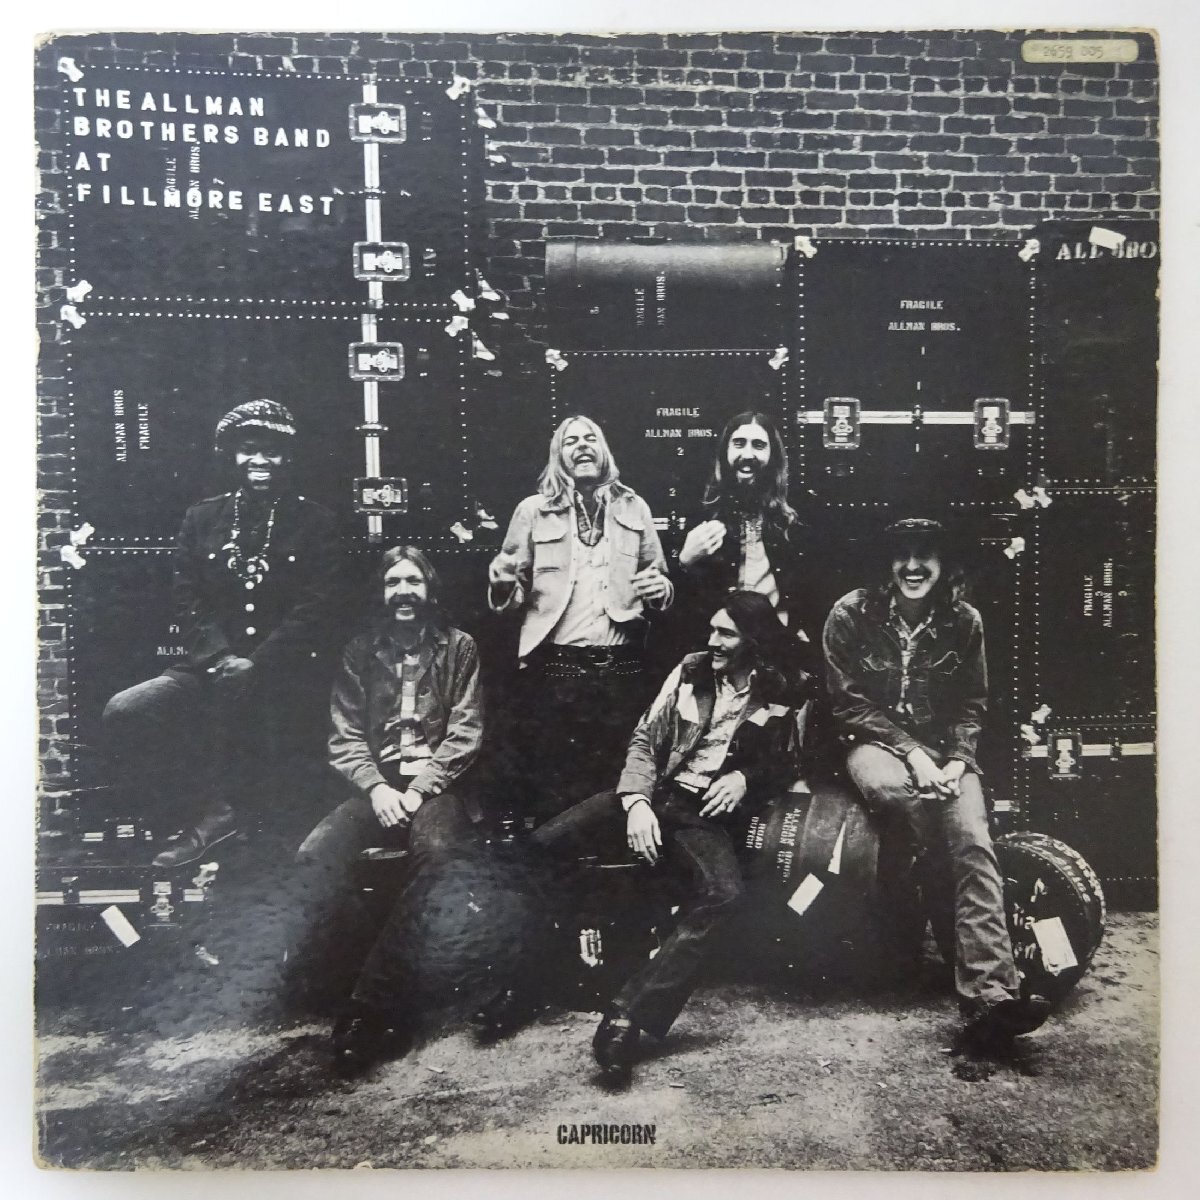 14031668;[UK original /2LP/ see opening ]The Allman Brothers Band / The Allman Brothers Band At Fillmore East